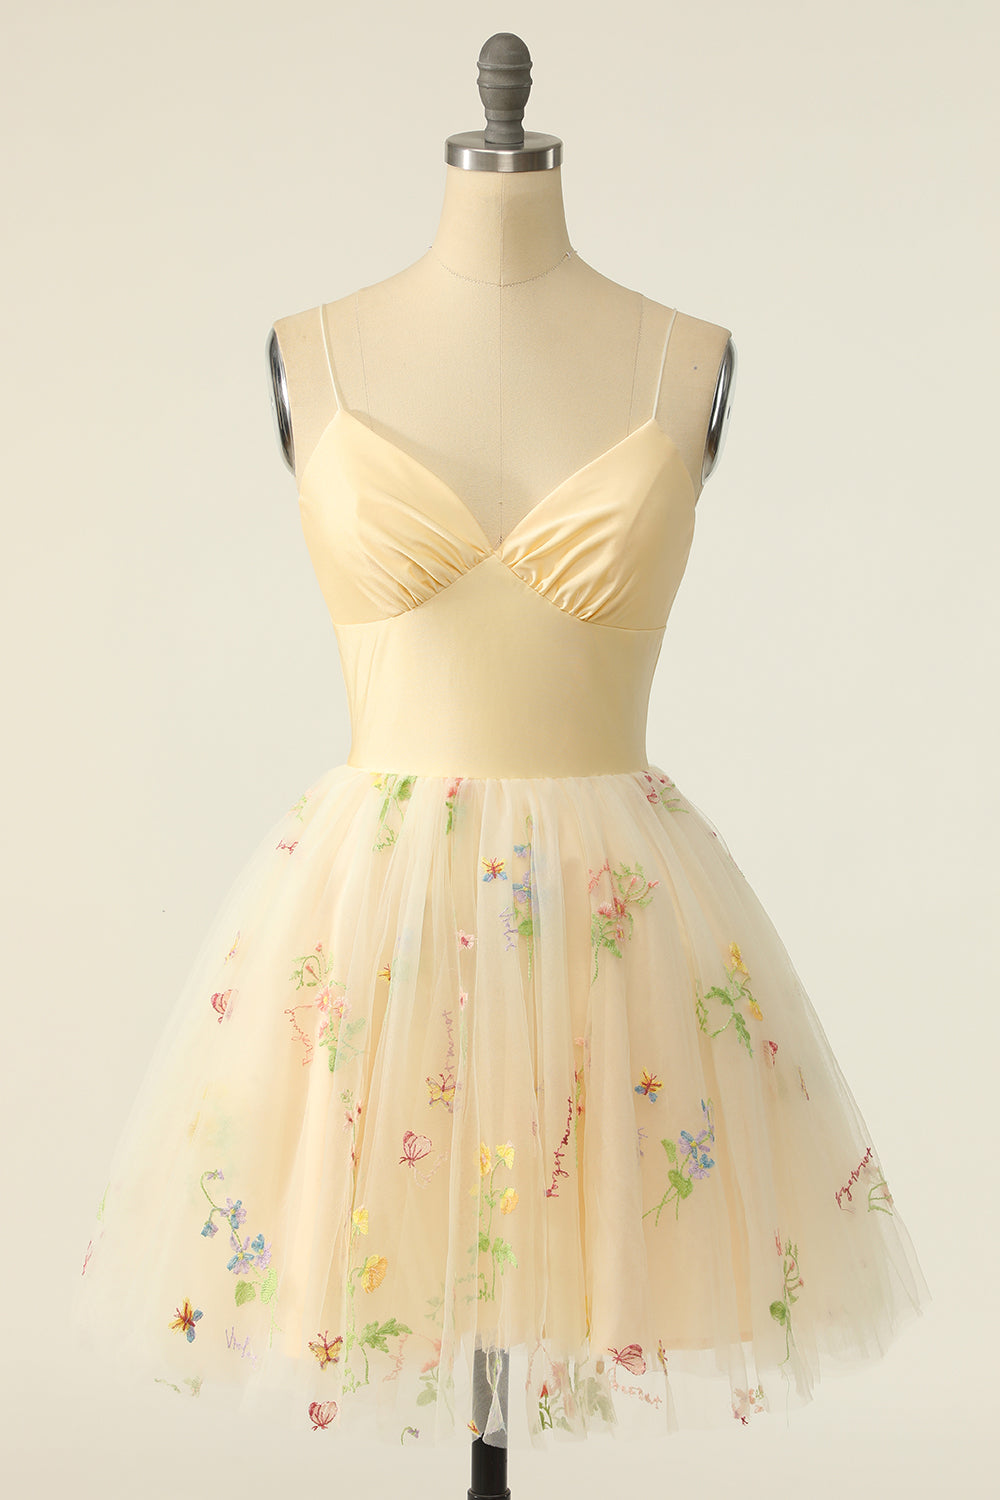 Fancy Dress, Champagne Tulle A-Line Homecoming Dress with Embroidery